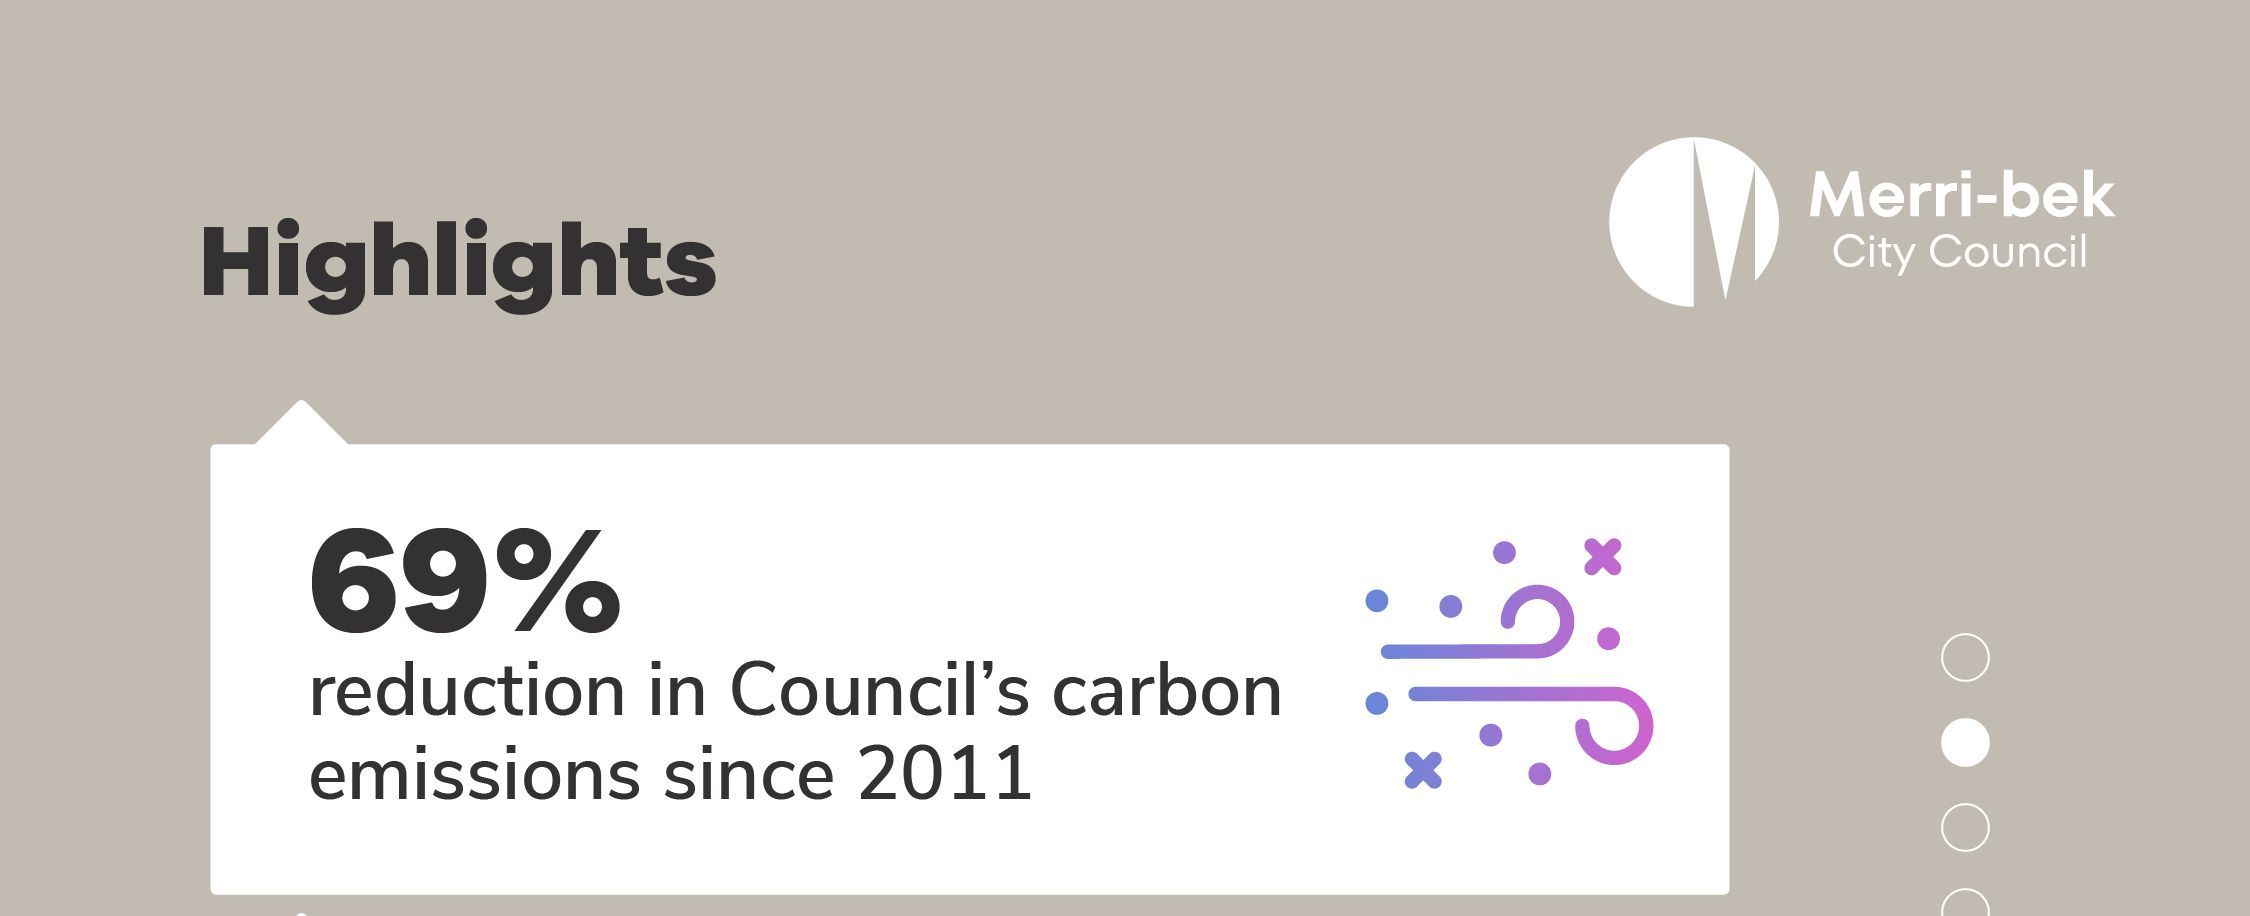 Infographic of Merri-be Councils Sustainability Highlights